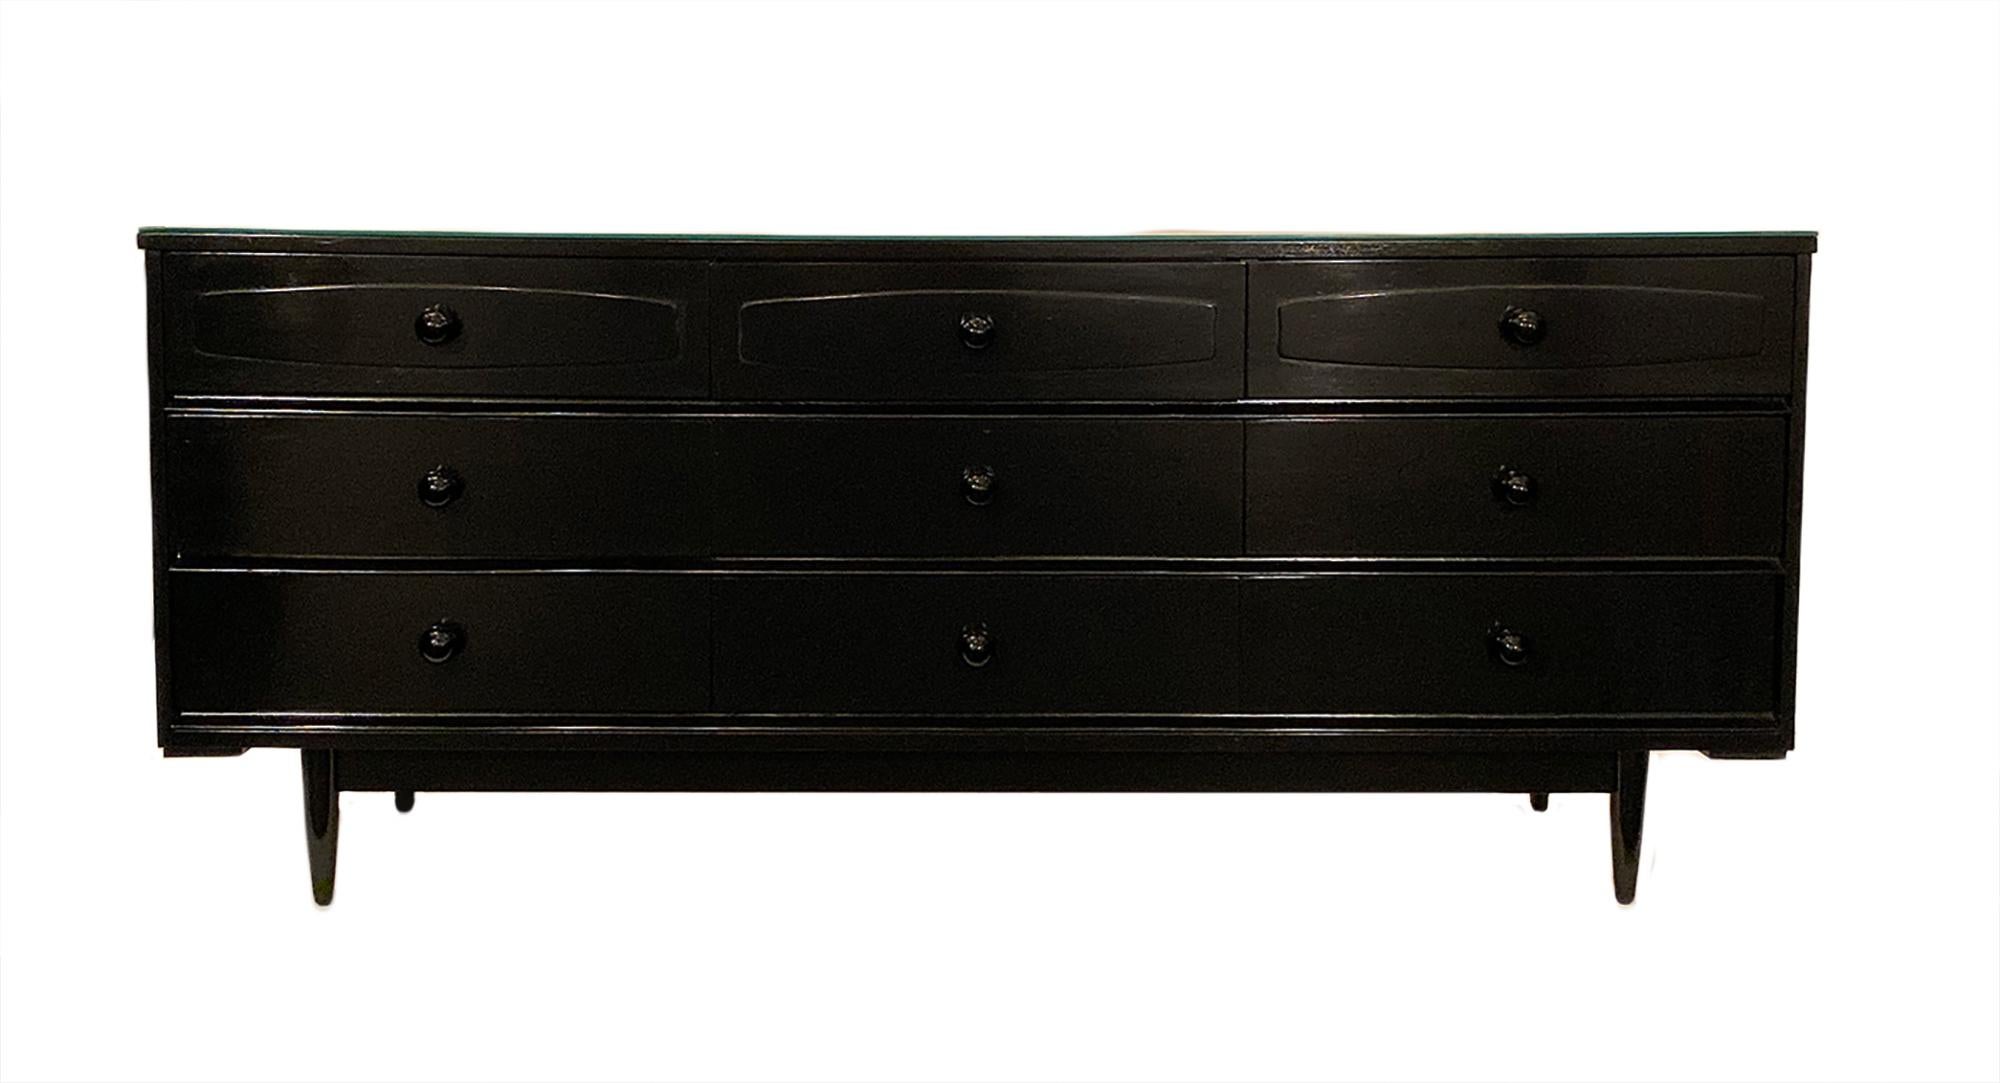 Modernist Danish chest with mirrored top. This piece is made of teak wood with nine dovetailed drawers and black Murano glass knobs. This piece is supported on tapered legs. It has been ebonized and finished with a French polish. A fabulous storage